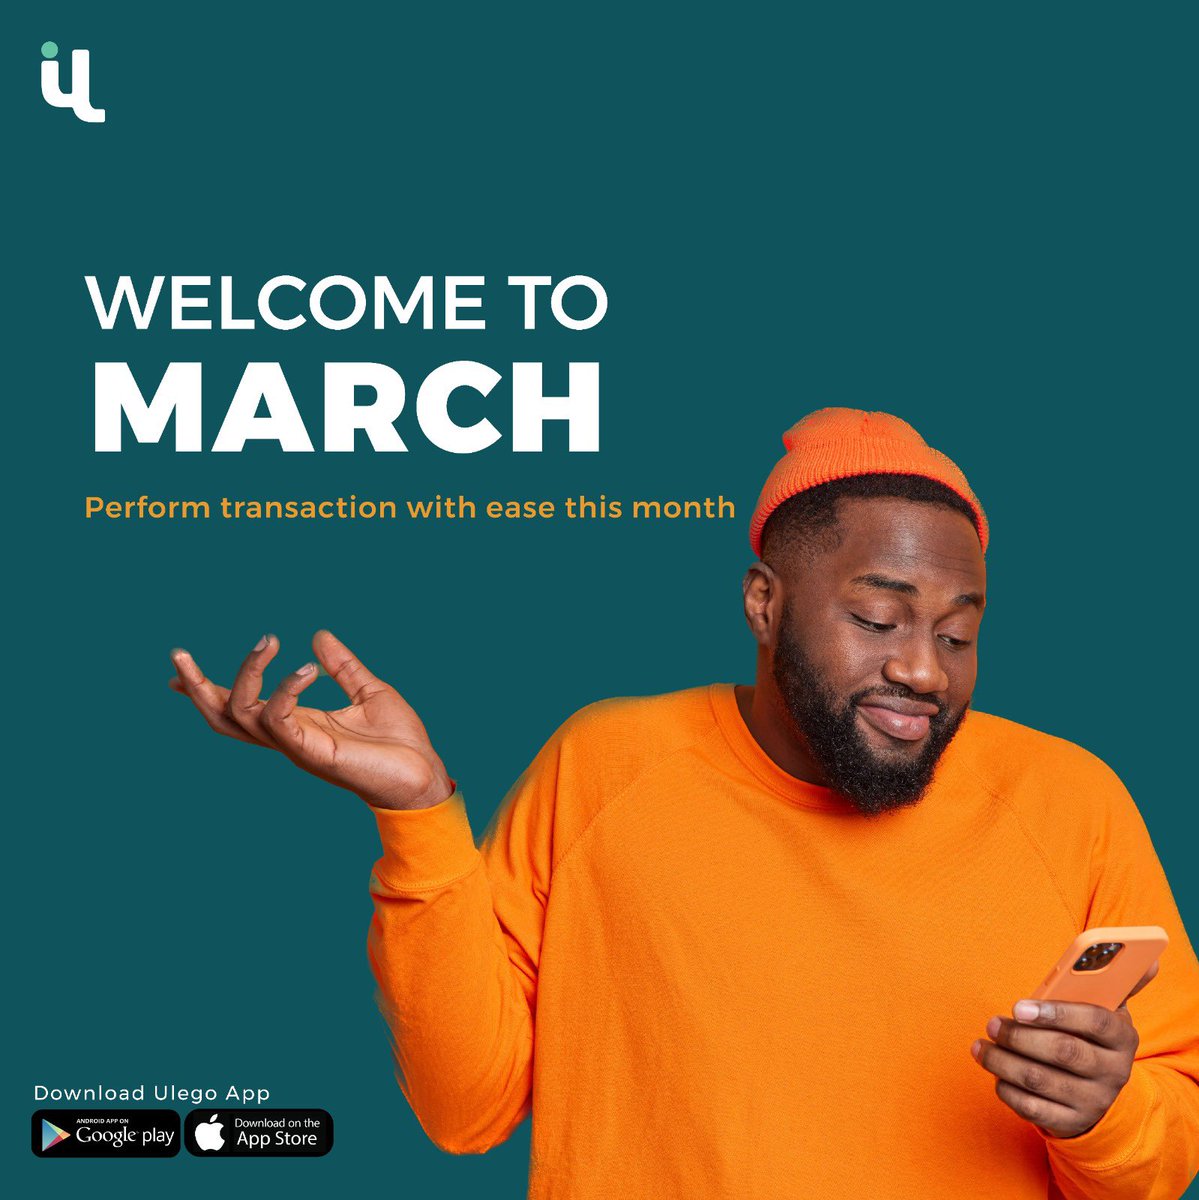 March into ease with Ulego. Carry out all your transactions seamlessly always.

Happy new month. 

#March1st #bankingapp